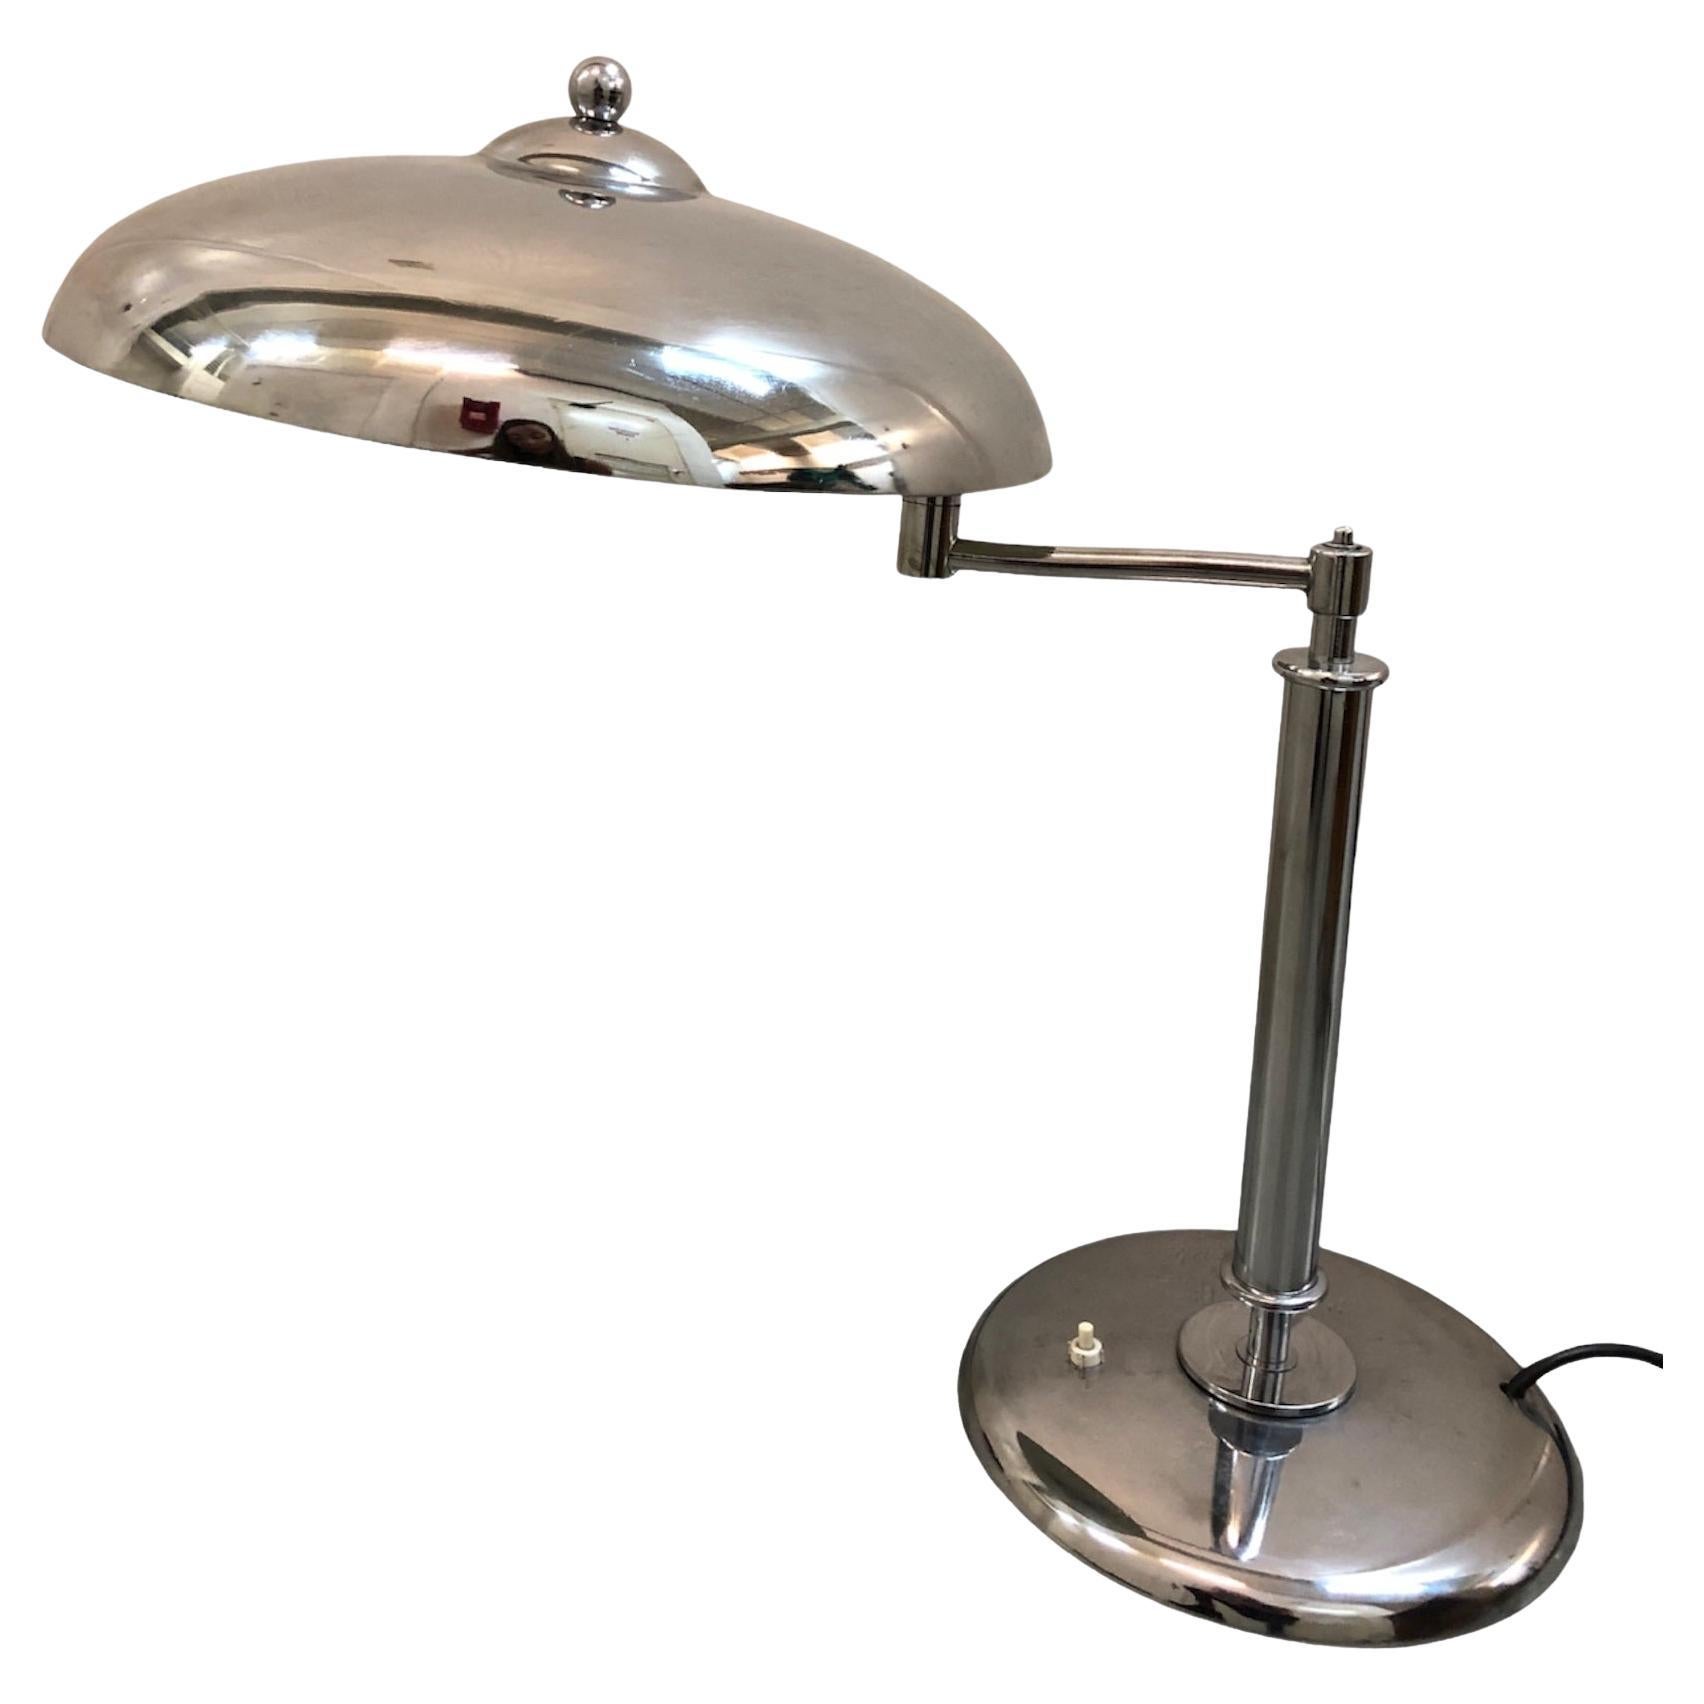 Art Deco Table Lamp in chrome, 1920, France For Sale at 1stDibs